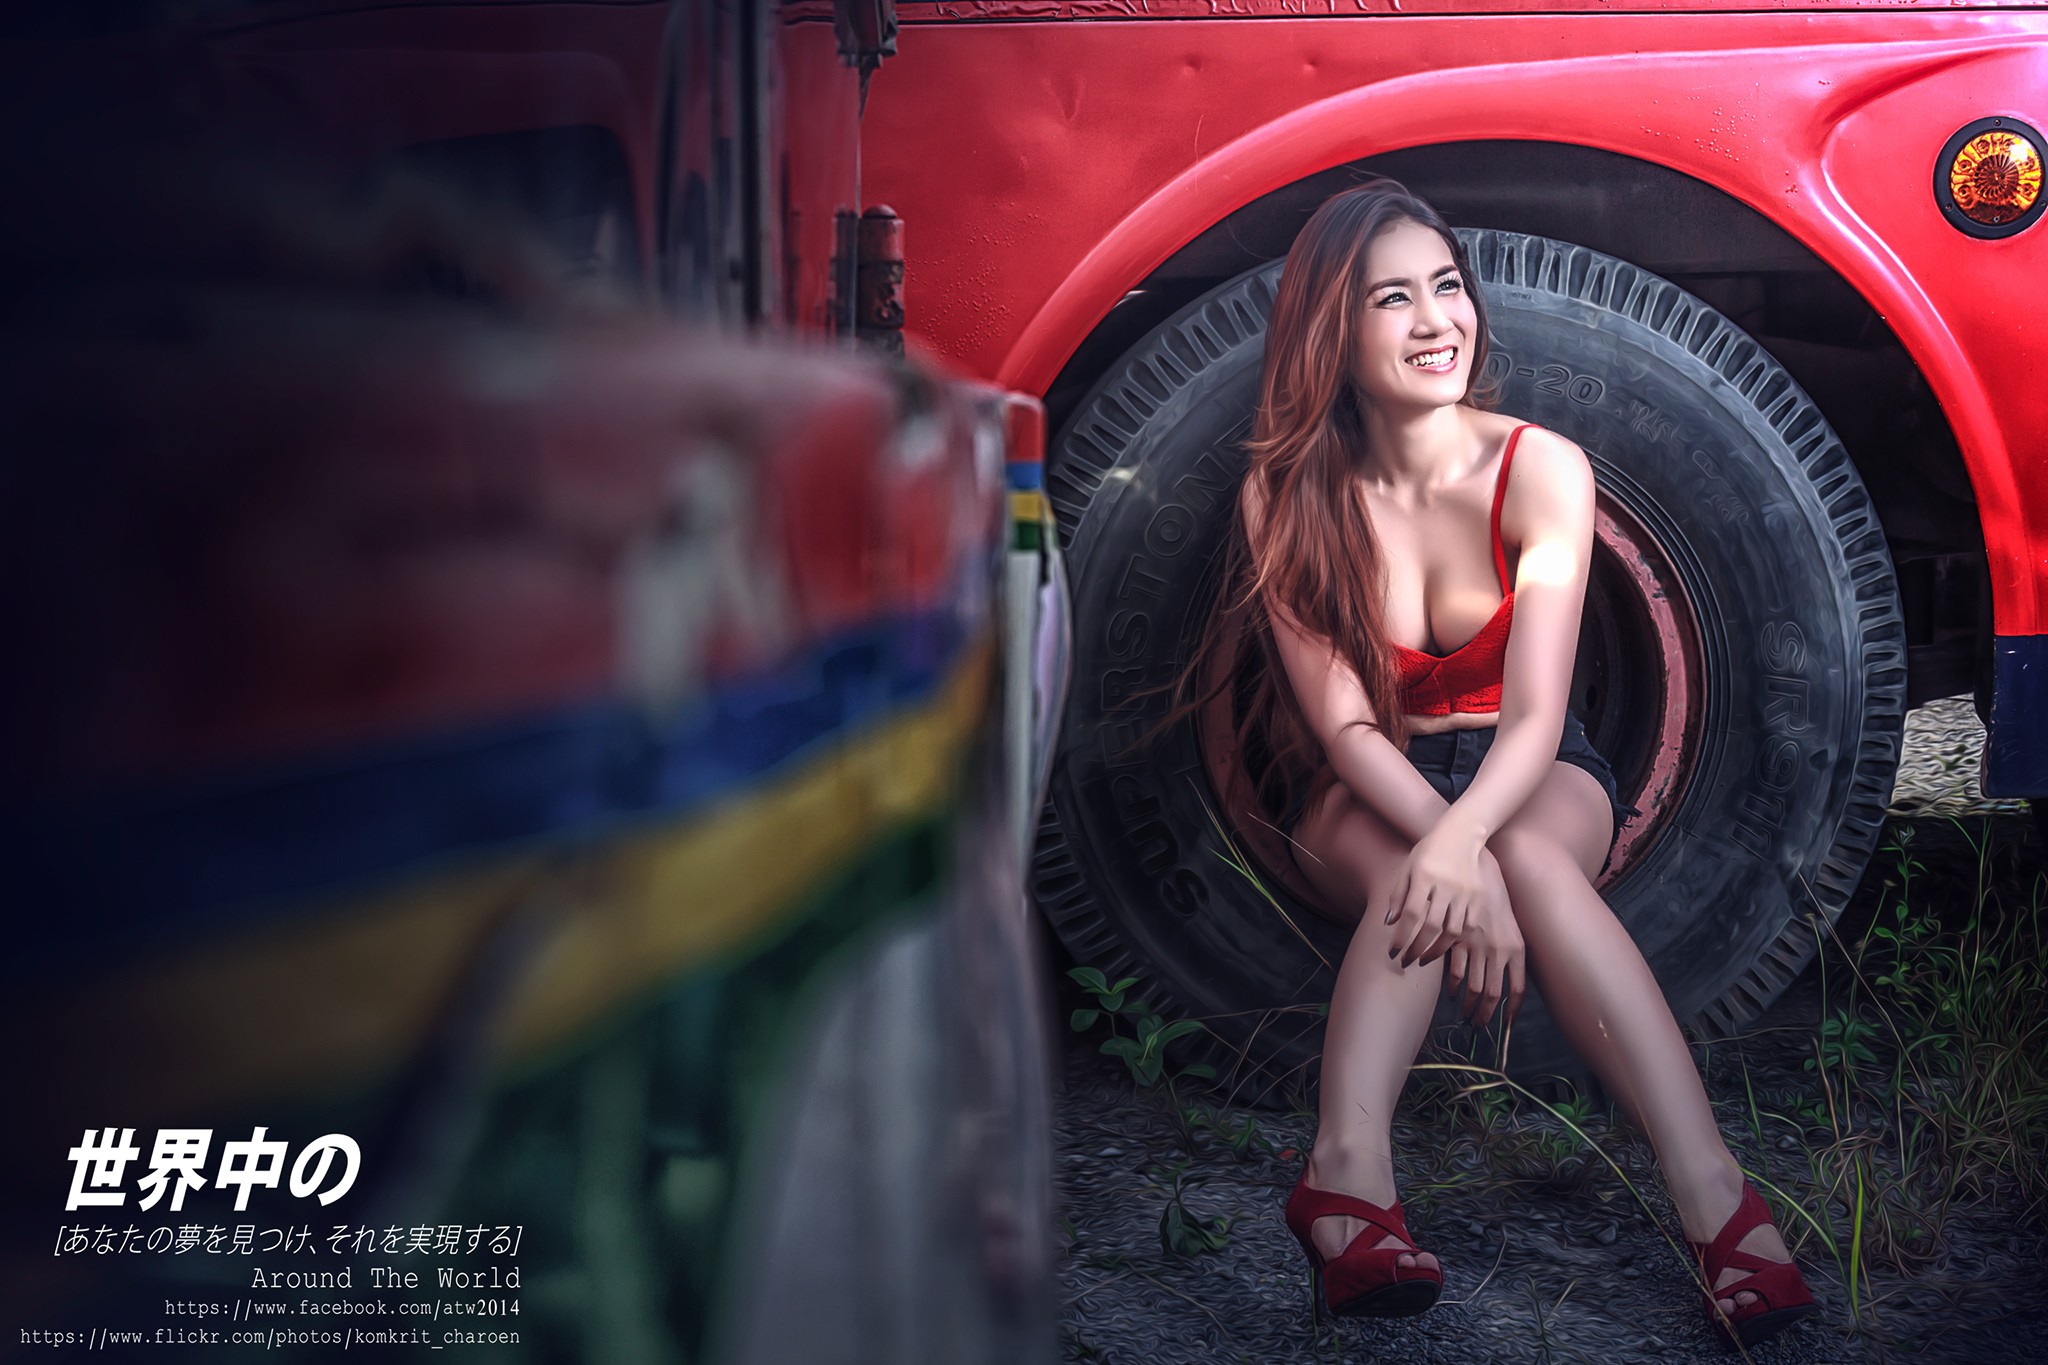 Red Tank Top Smiling Red Cars Shorts Red Heels 2048x1365